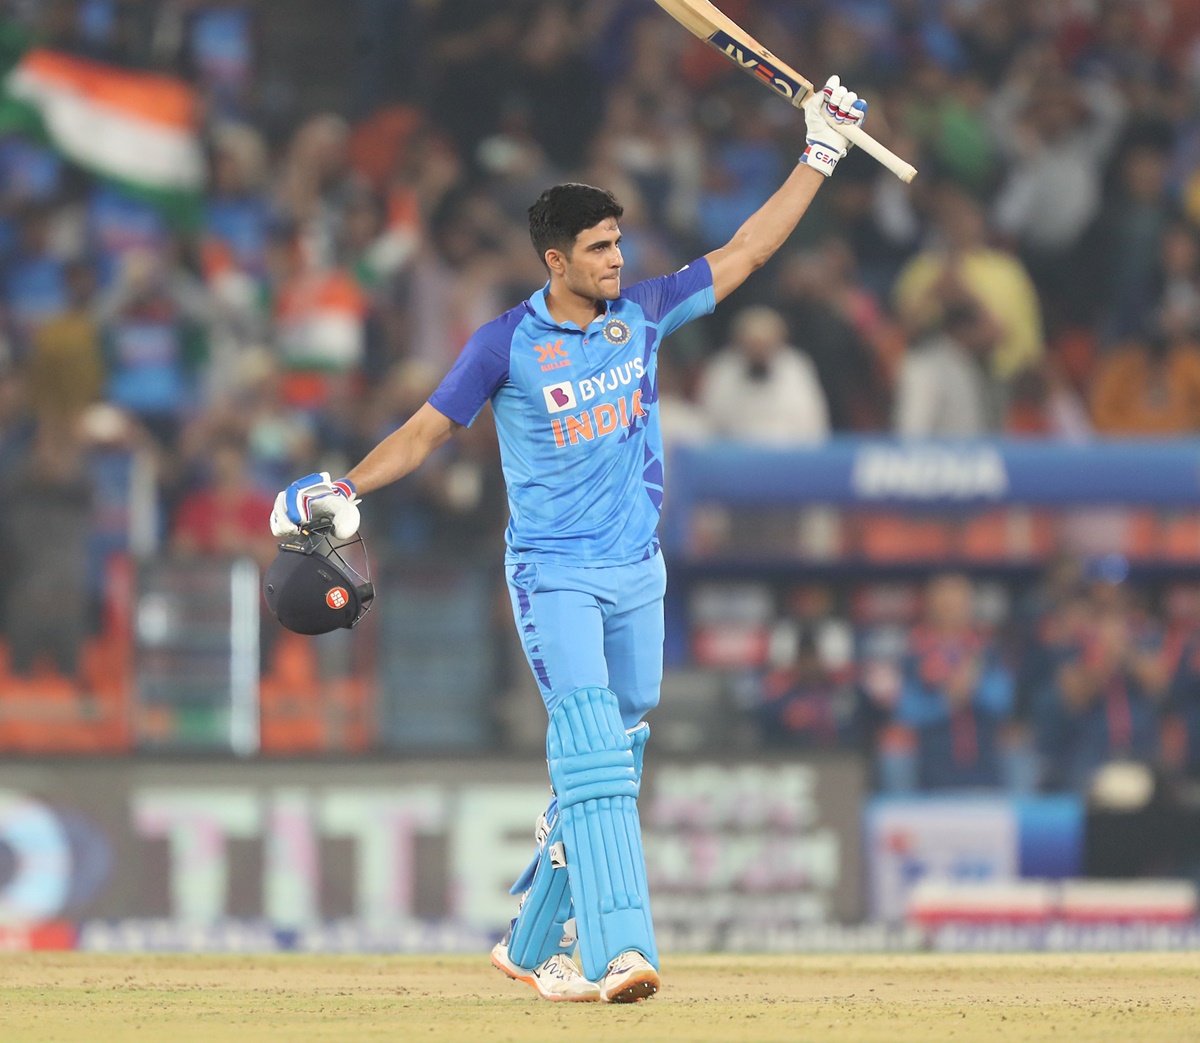 Shubman Gill climbed a rung to 4th spot in the ICC ODI rankings released on Wednesday